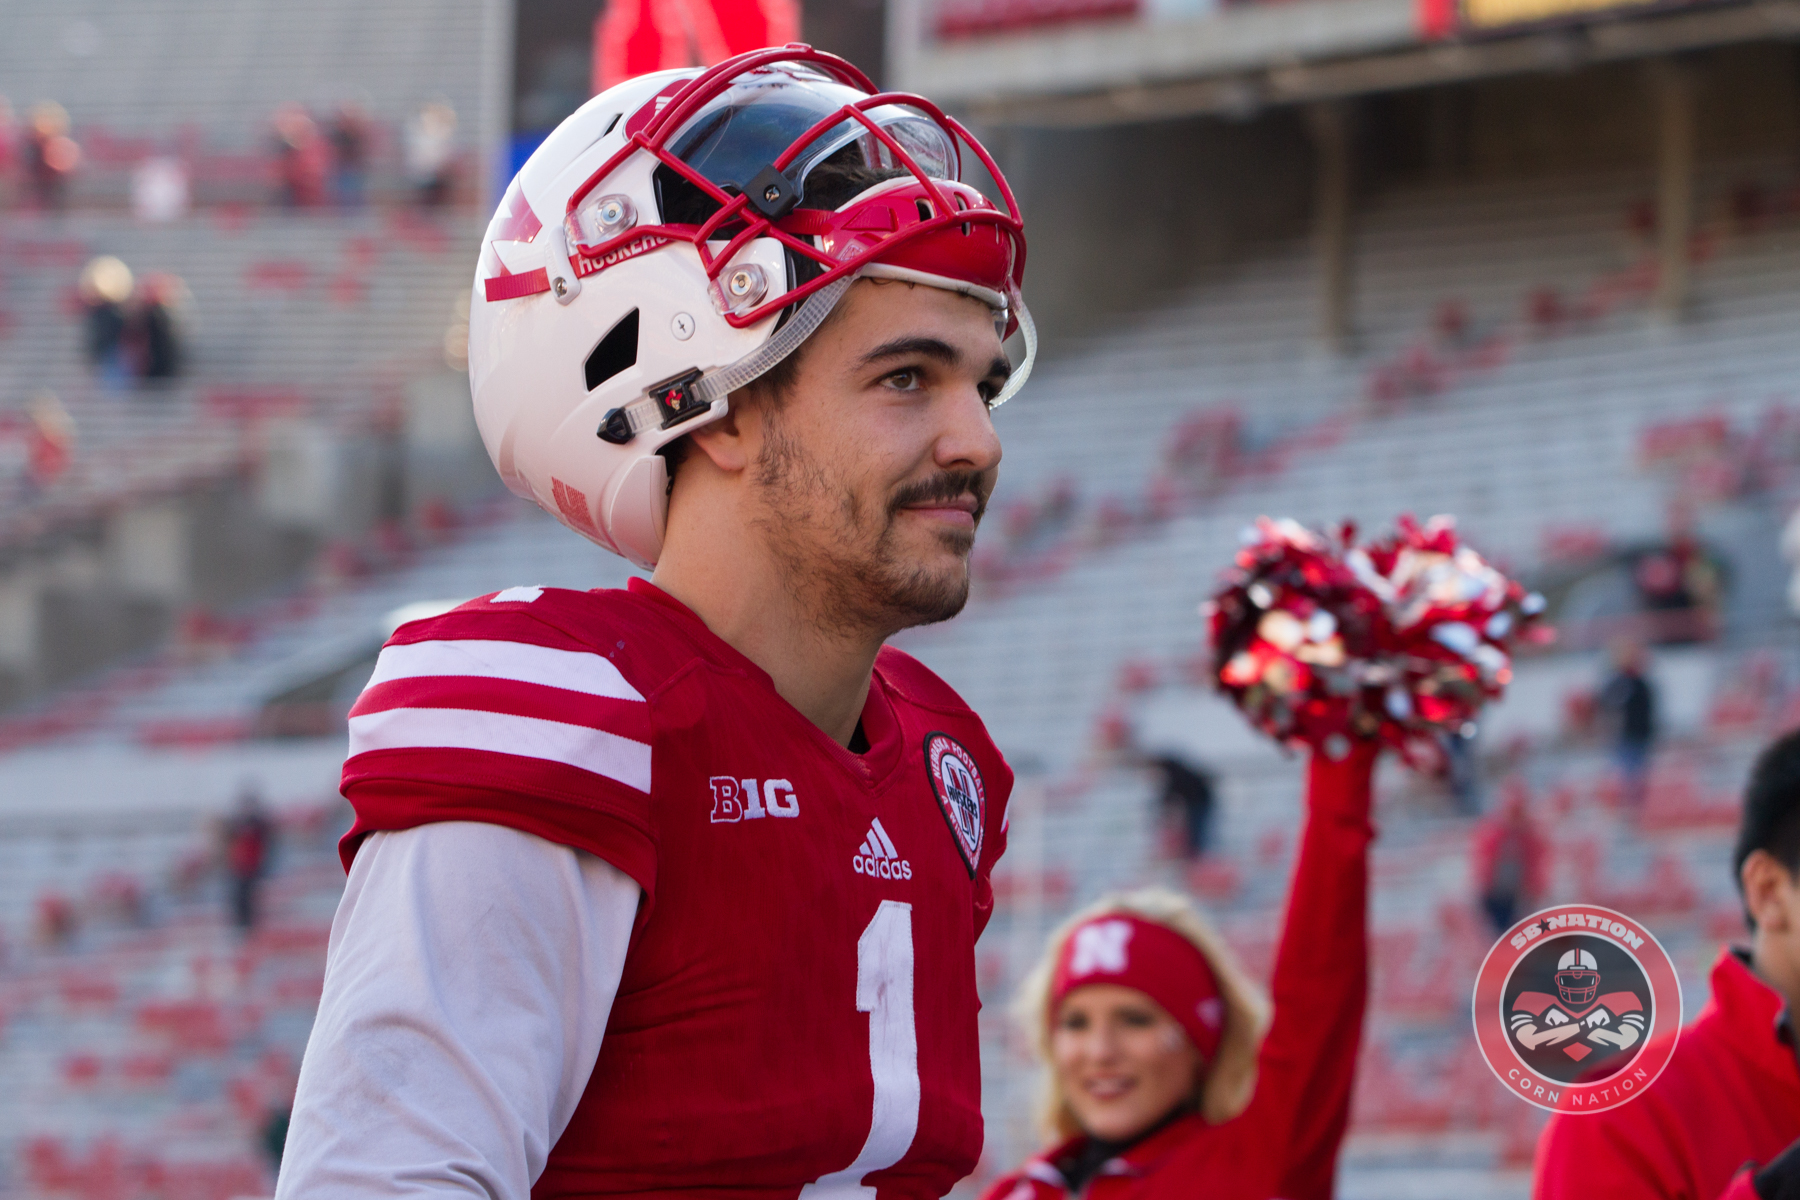 Gallery: Huskers Cap Home Schedule with Win Over Maryland